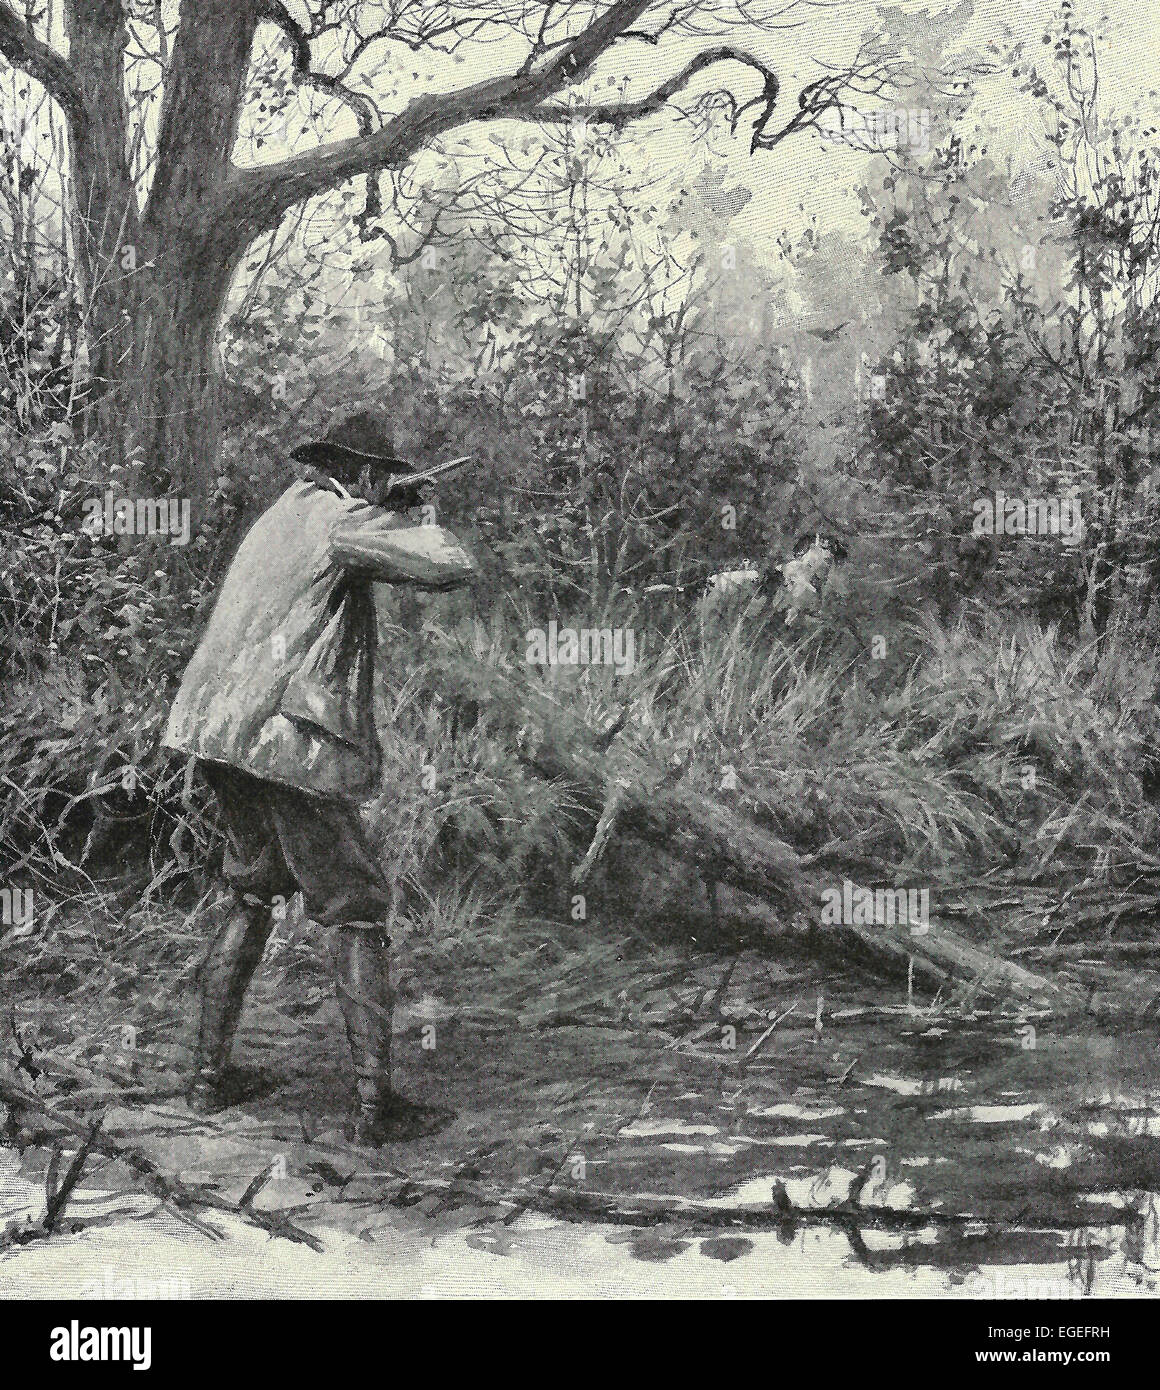 Down in the rich black loam of the river banks hides the elusive woodcock - Vintage hunting 1916 Stock Photo